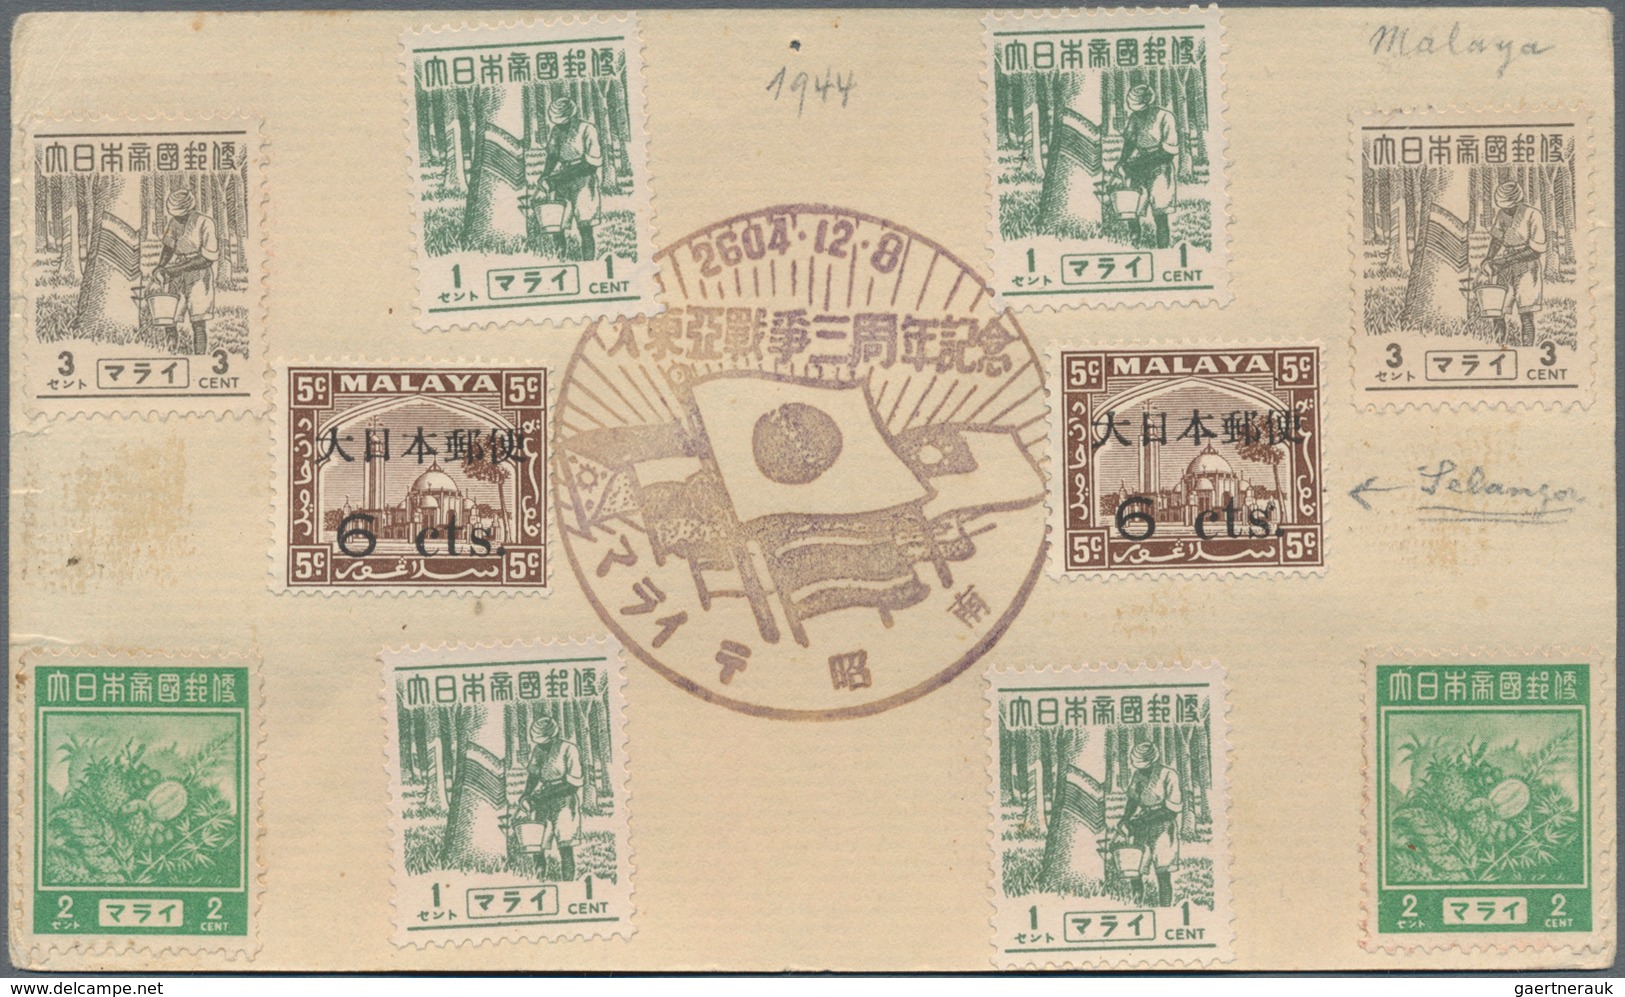 Japanische Besetzung  WK II - Malaya: Penang, 1943, three covers used local: General issues 50 C. ti